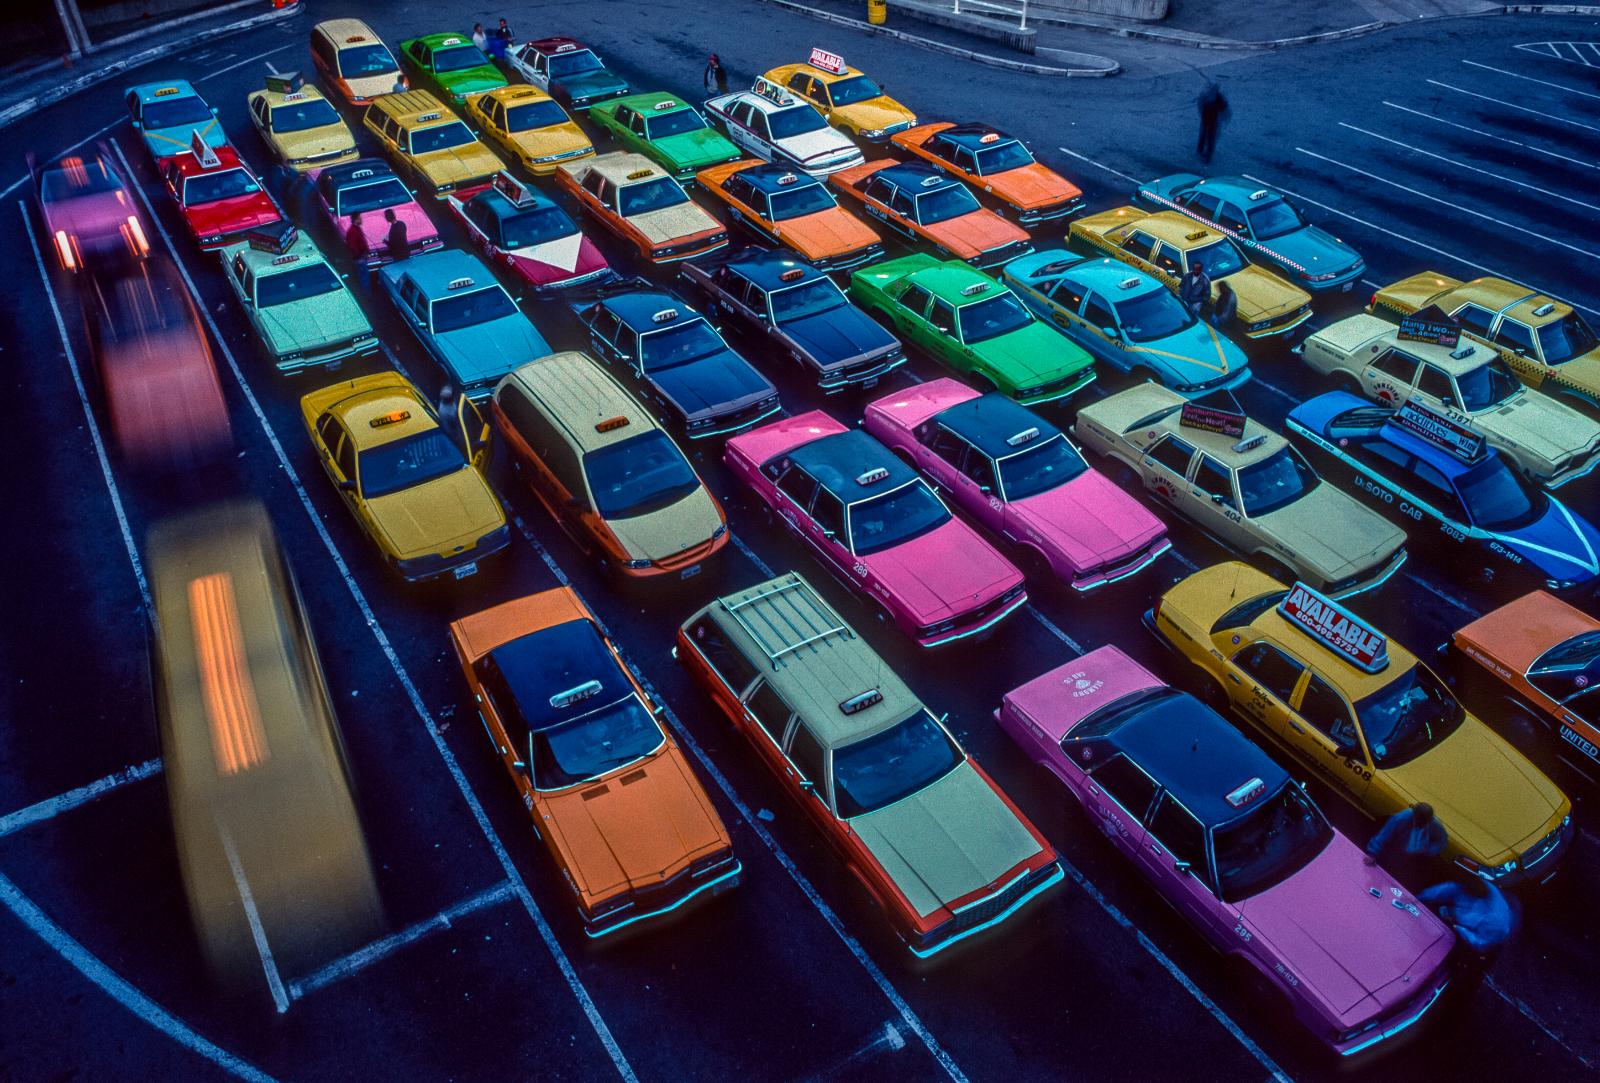 Airport Taxi Cabs | Buy this image